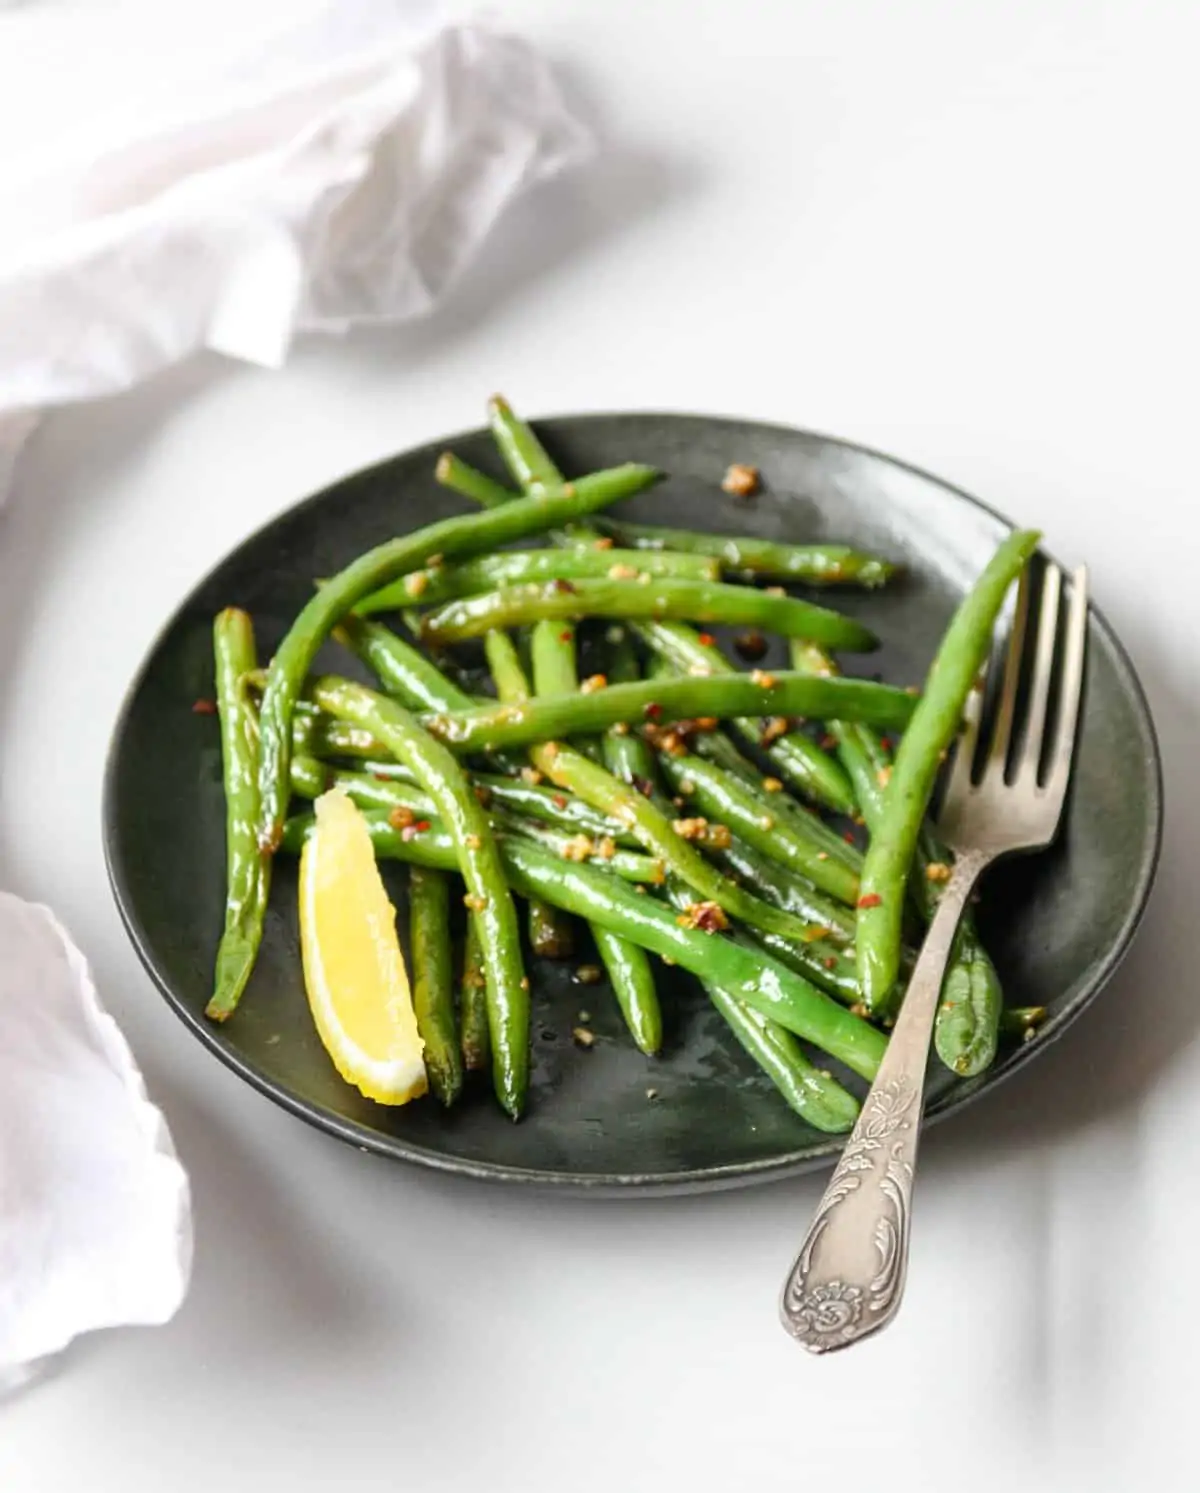 Sauteed Green Beans with Lemon and Garlic by The Food Blog // FoodNouveau.com